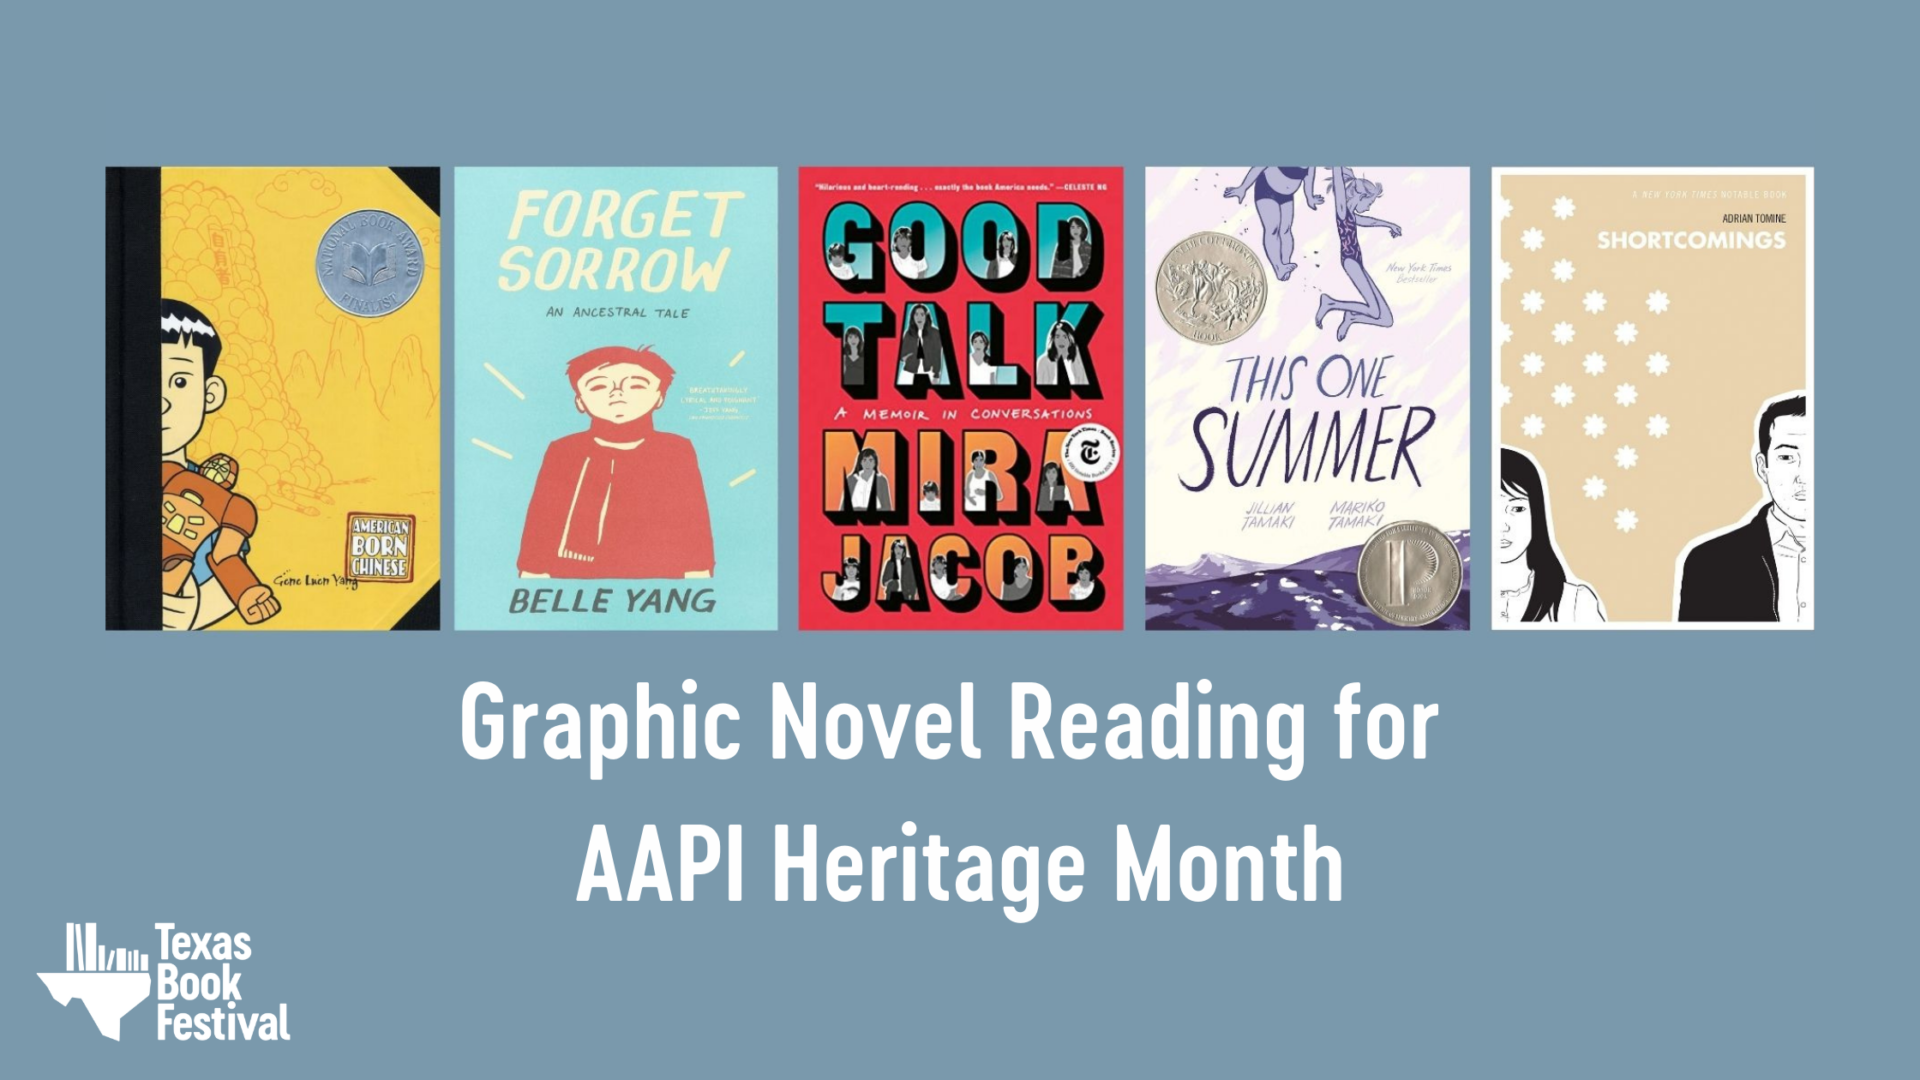 Graphic Novel Reading for AAPI Heritage Month